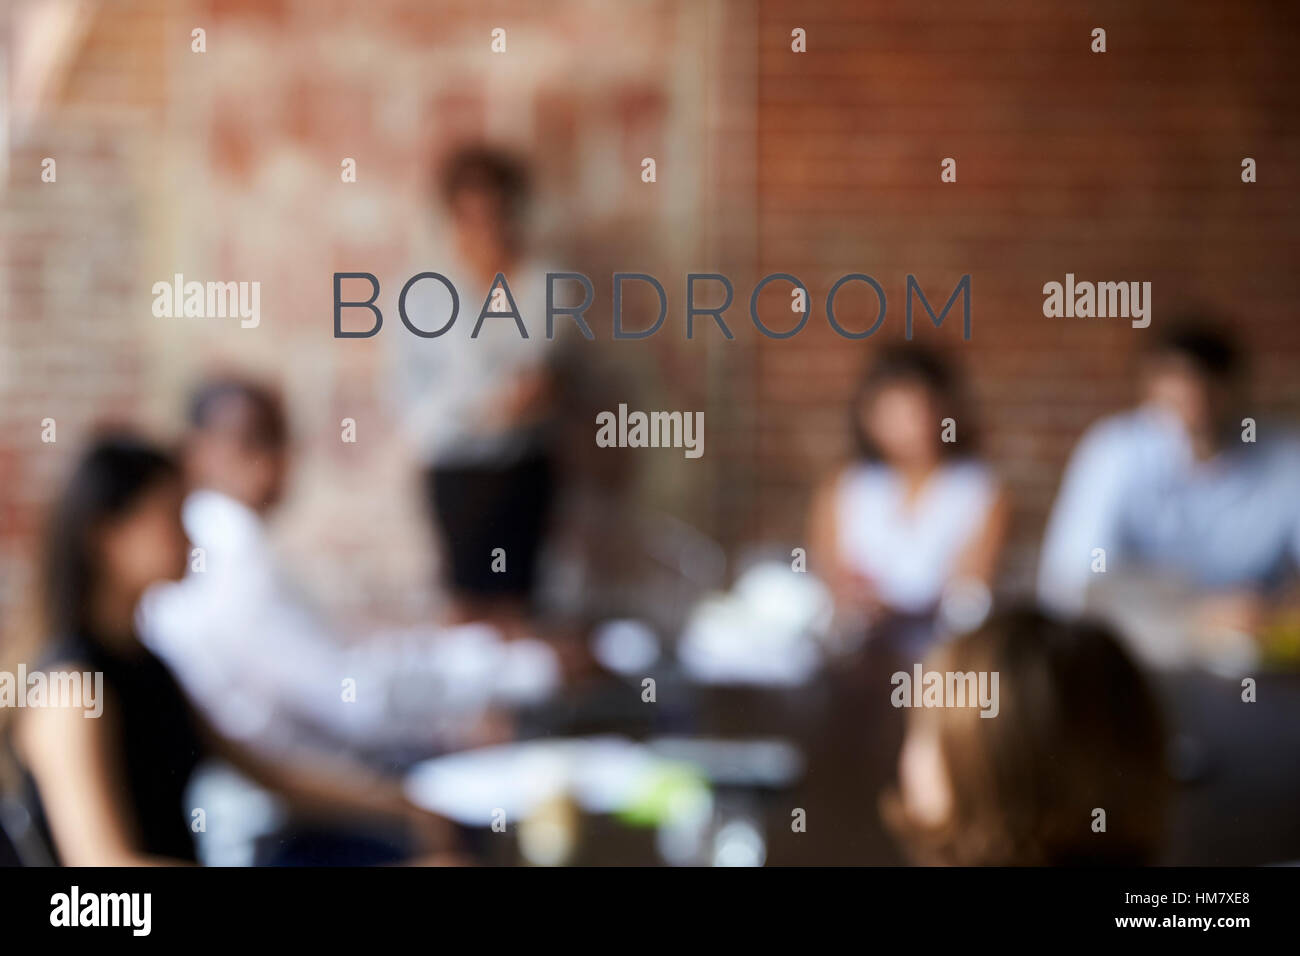 View Of Meeting Through Glass Door Labelled Boardroom Stock Photo